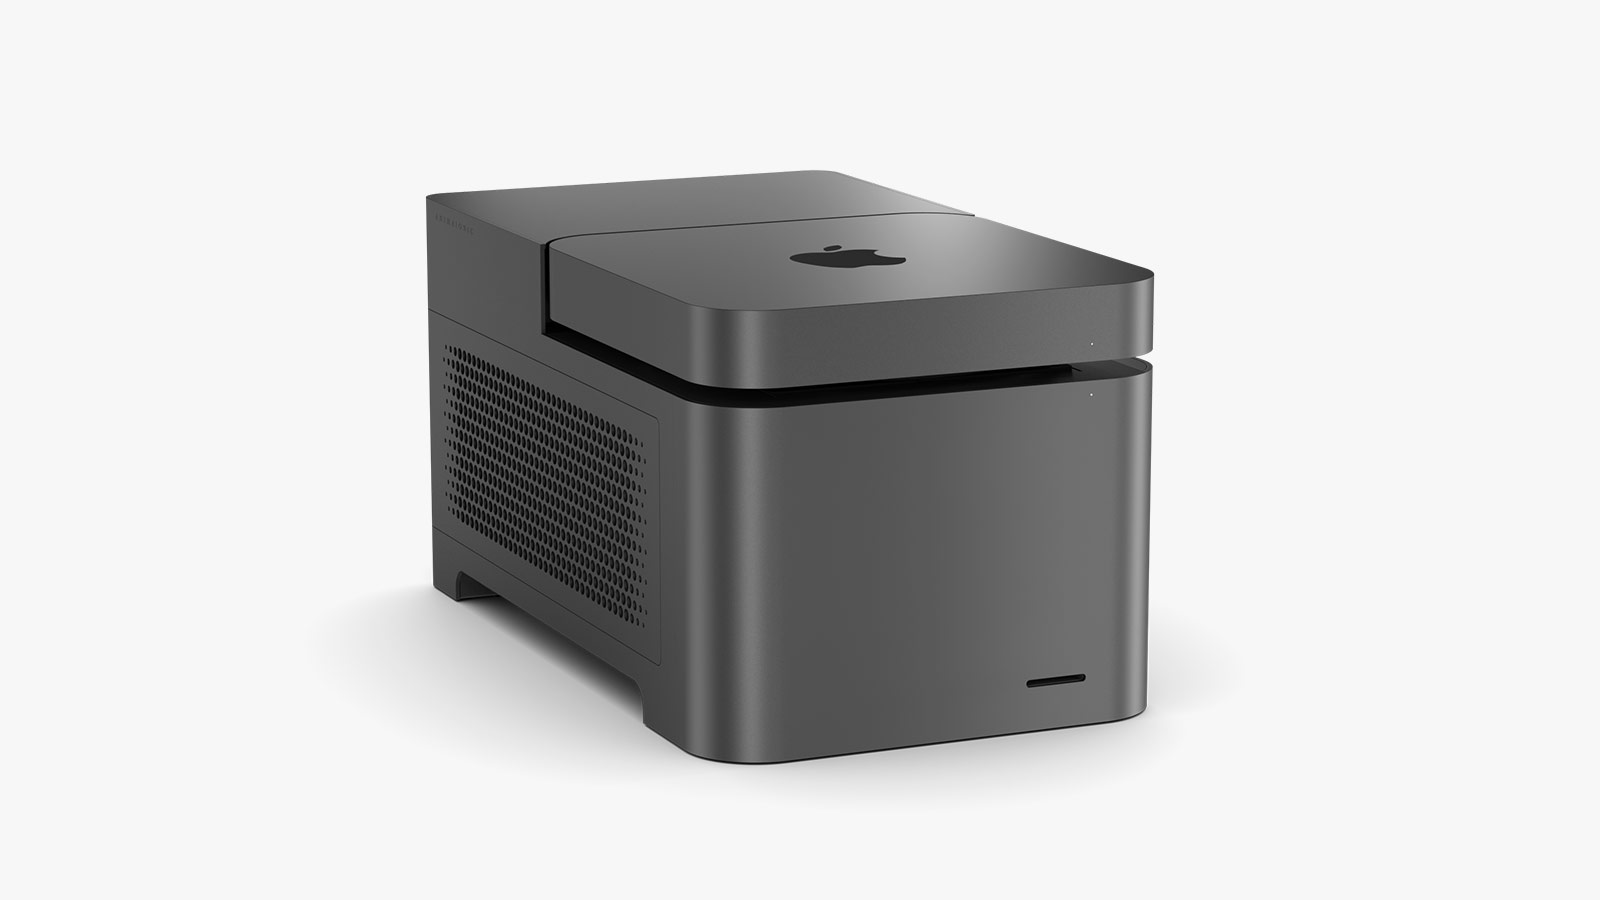 Give Your Mac Mini The Power Of A Mac Pro With This Product - IMBOLDN